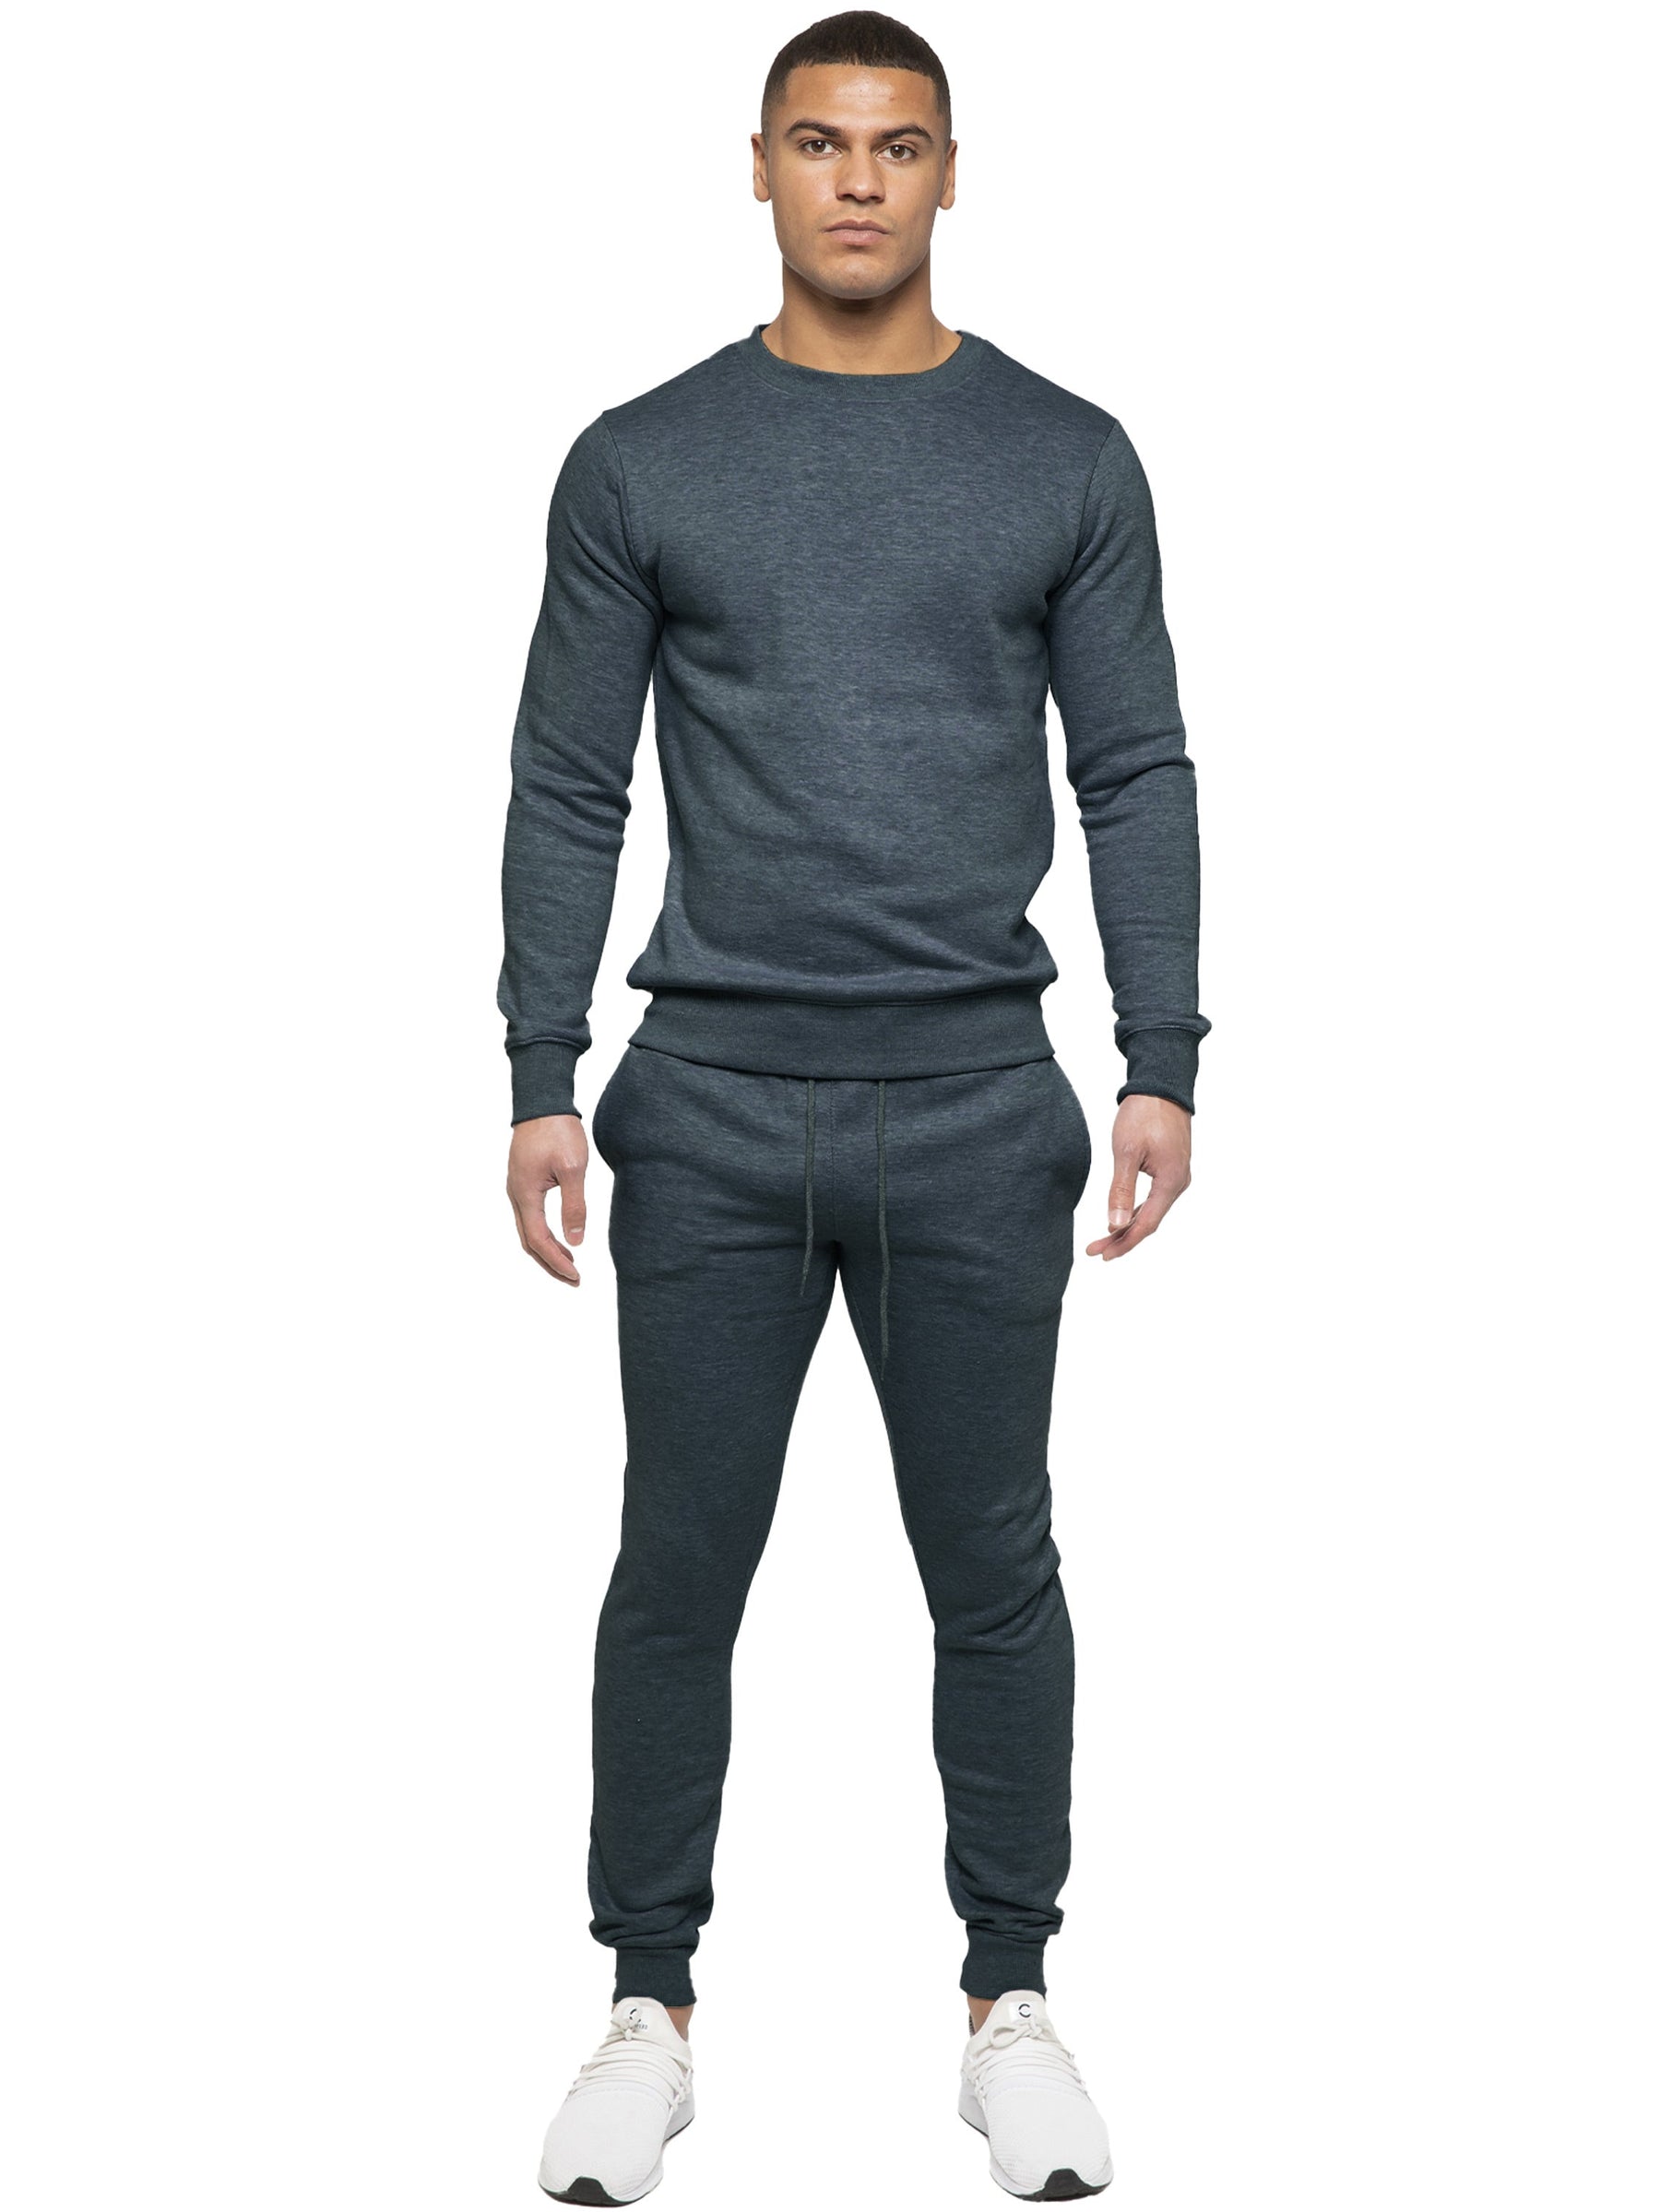 KZMS138 Copy of Kruze Mens Comfortable Tracksuit Top and Joggers Set KRUZE RAWDENIM